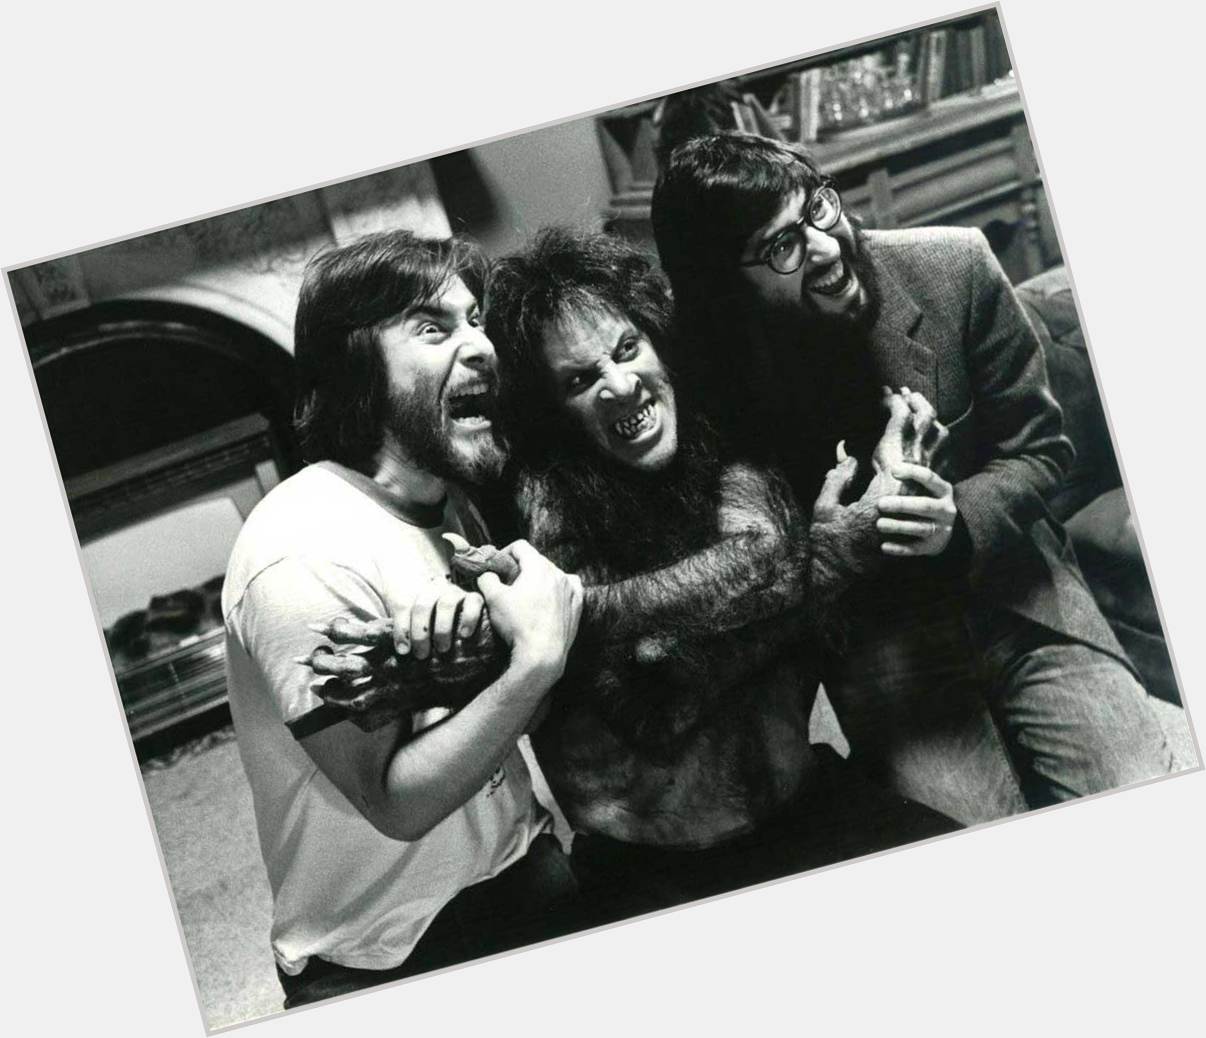 Special effects legend Rick Baker turns 70 today. Happy Birthday Rick. - Mike 